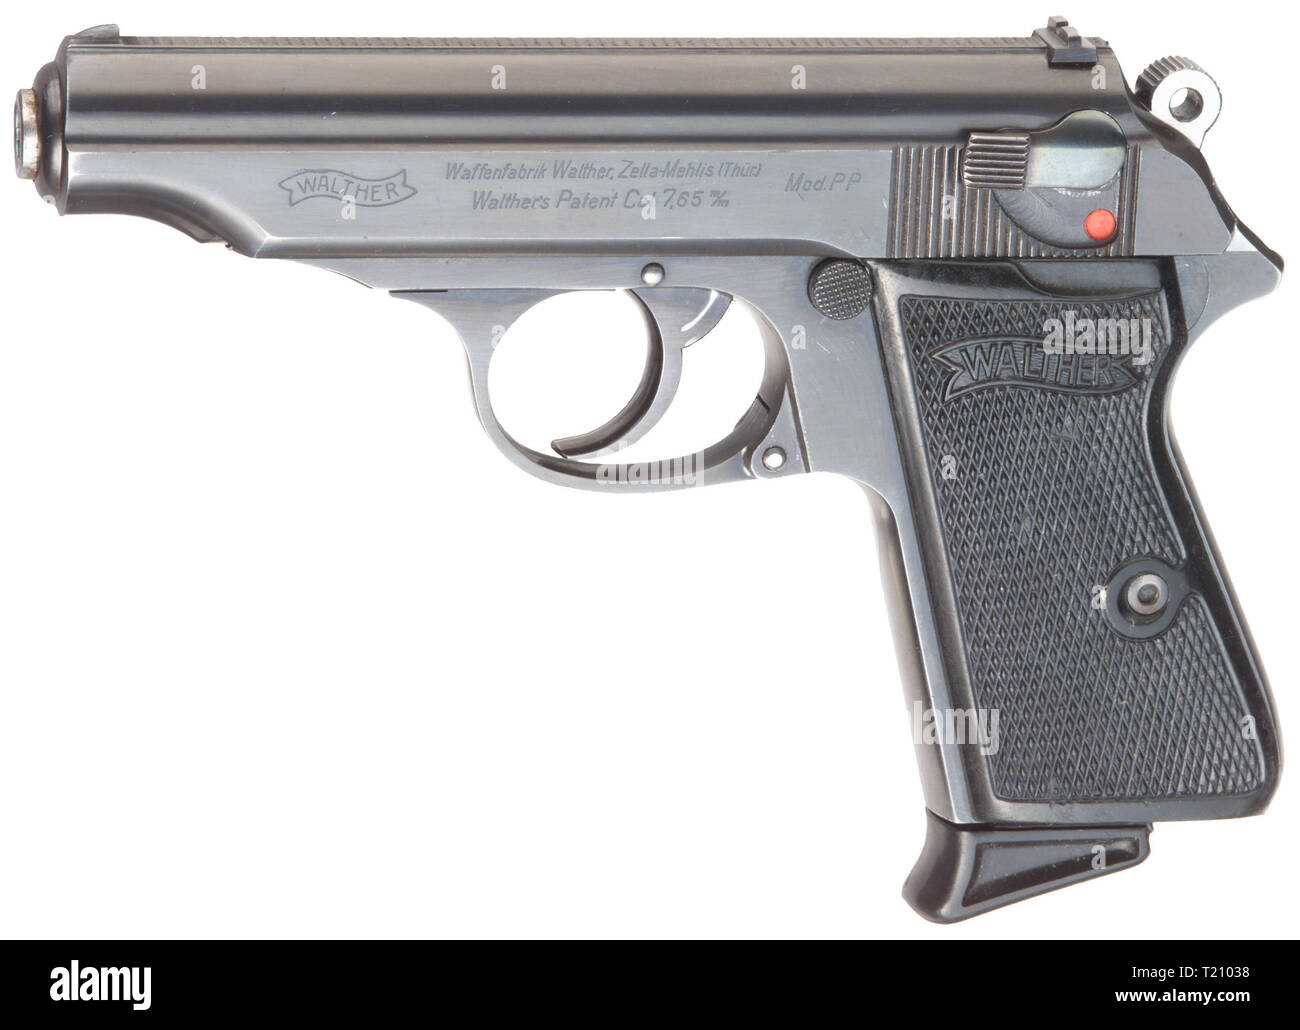 Piccole armi, pistole, Walther PP pistola calibro 7,65 mm, Additional-Rights-Clearance-Info-Not-Available Foto Stock